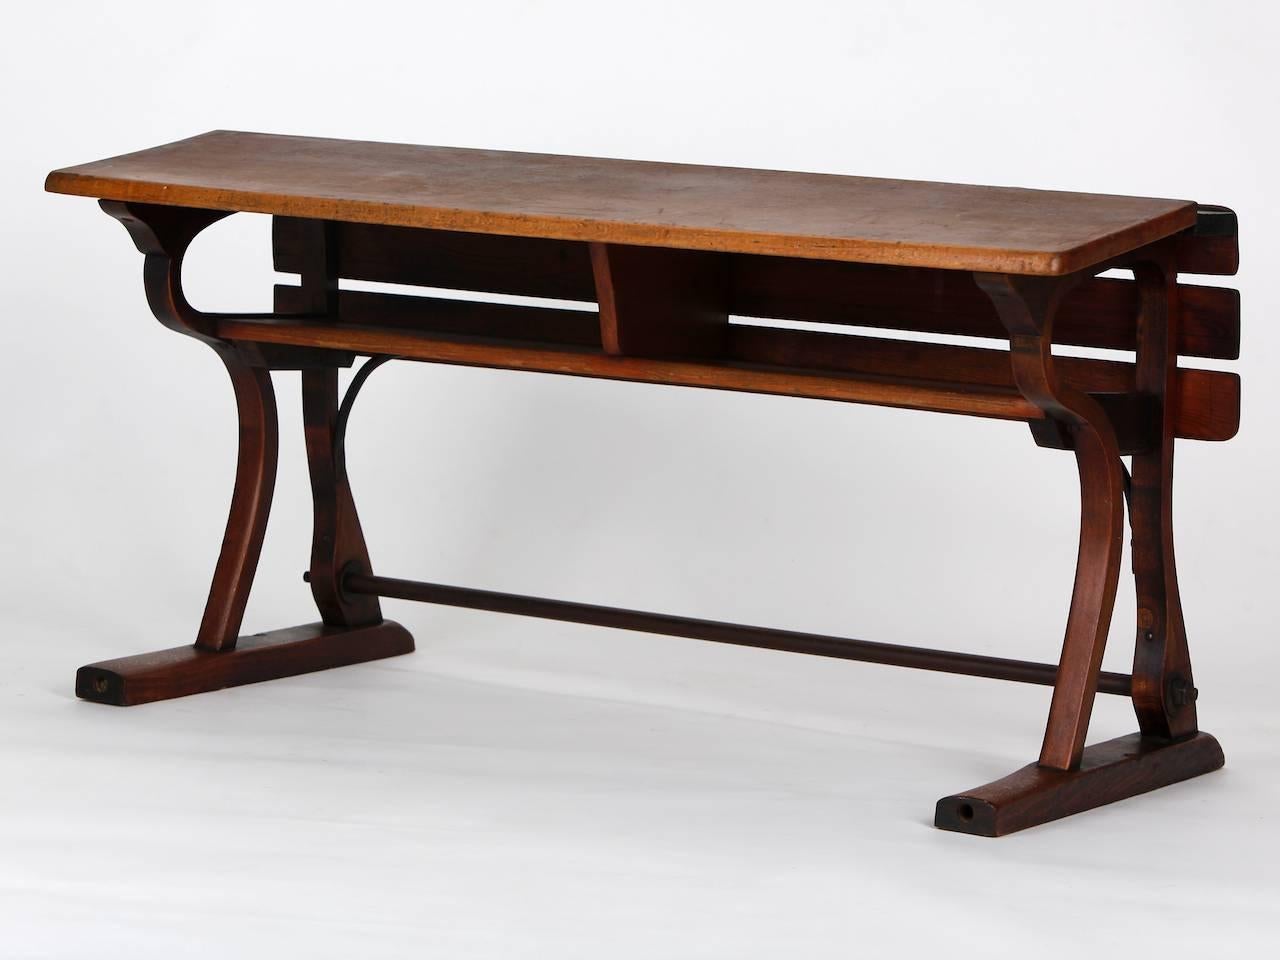 These two similar school benches are from a school in the former Czechoslovakia. The pieces were produced by D. G. Fischel & Sons in Mimon between 1890 and 1930 and are in a very good restored condition. The small desk measures 58 cm tall and 57 cm